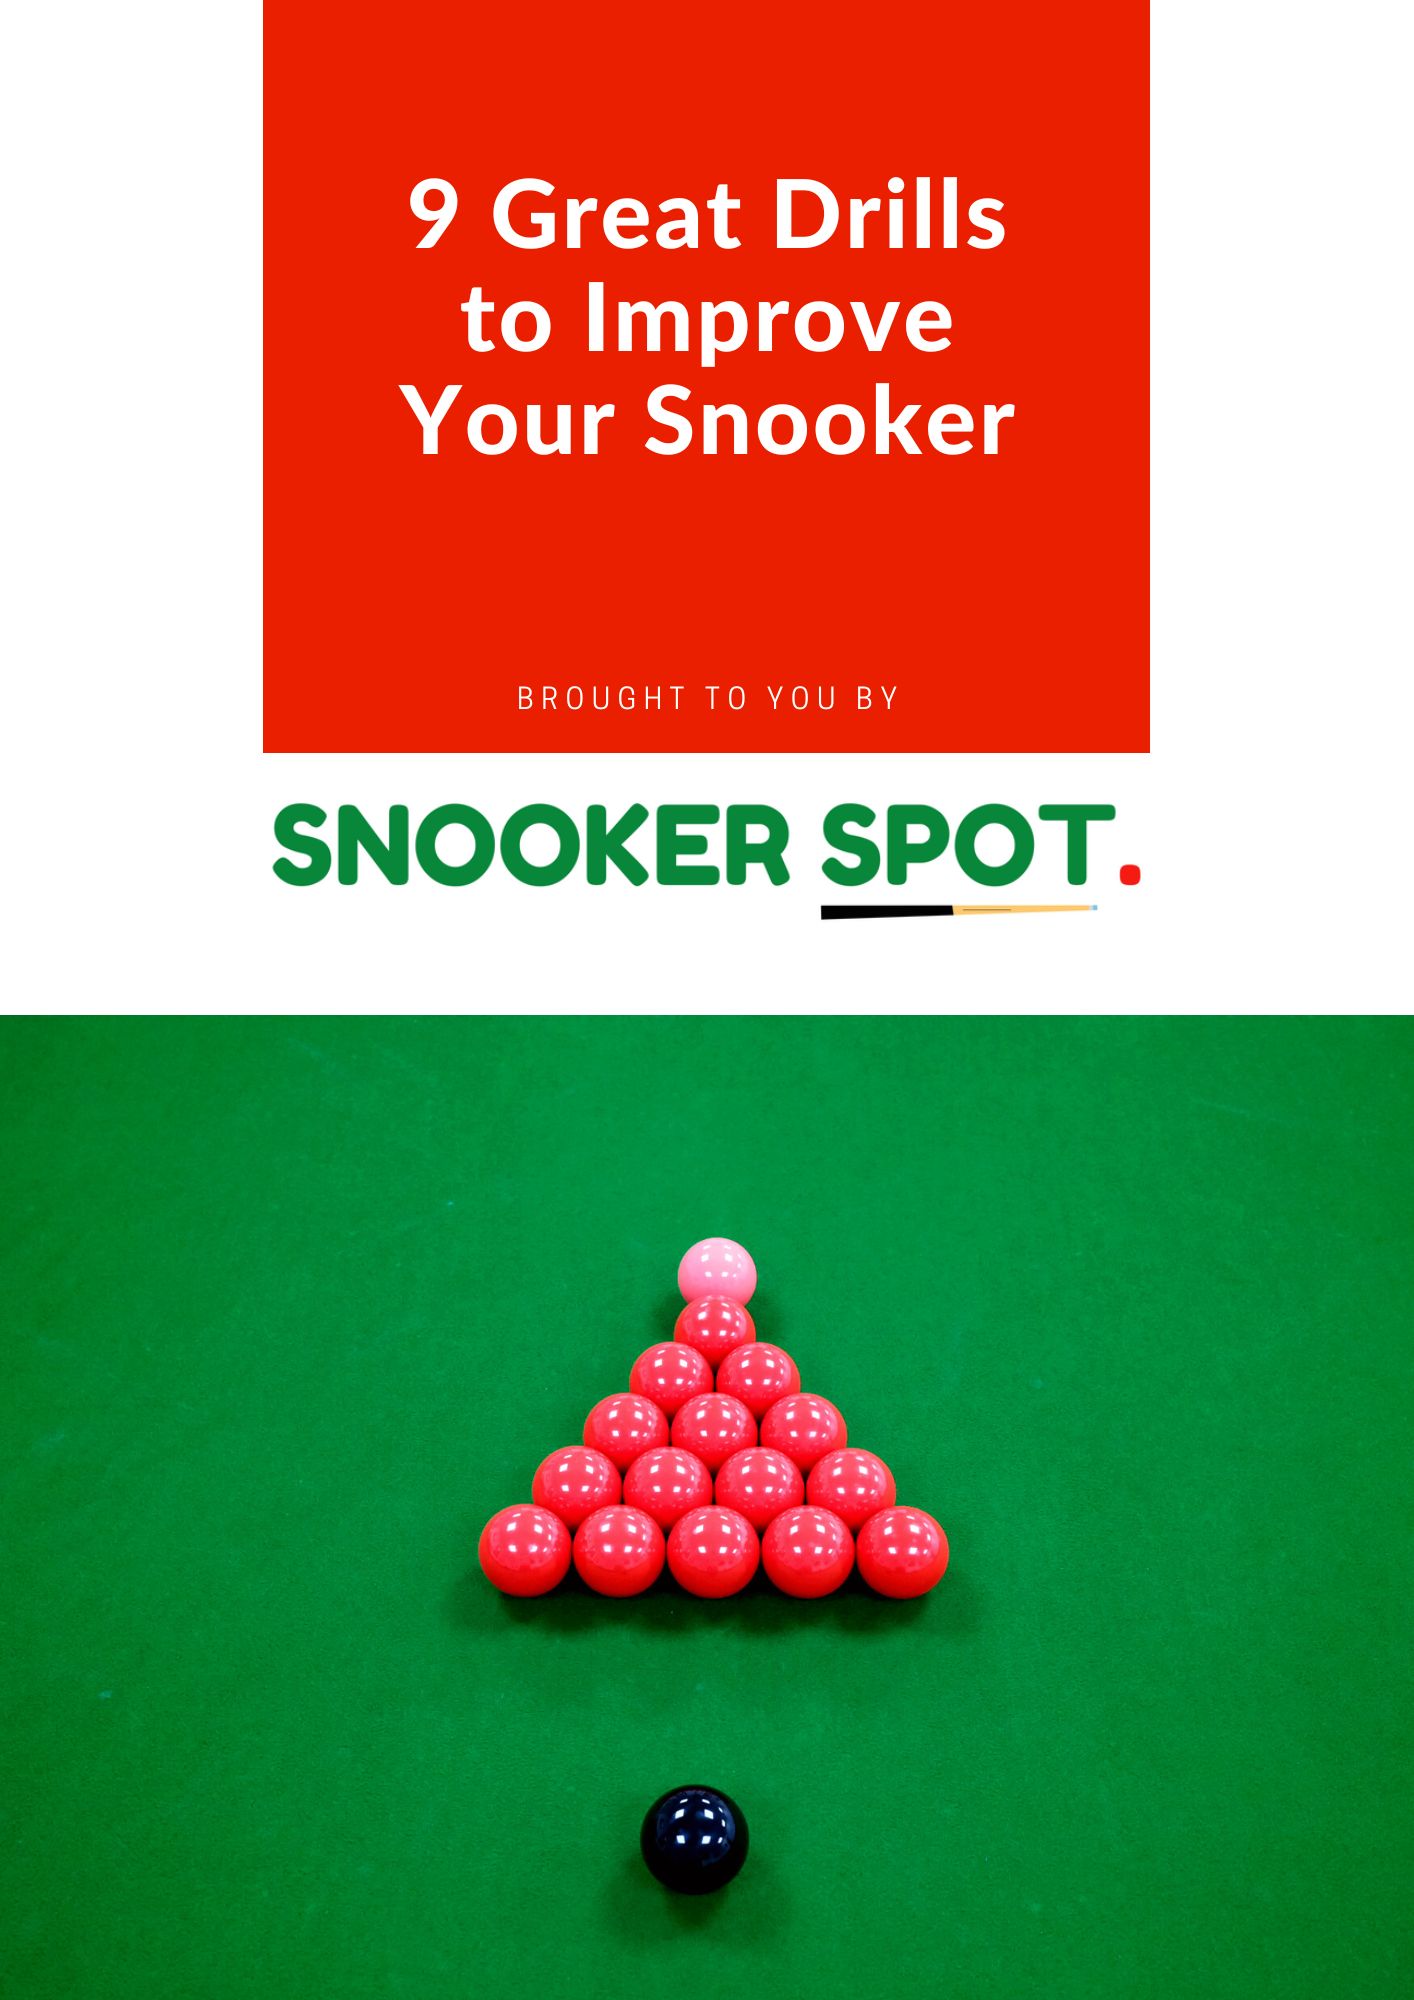 Drills to improve your snooker